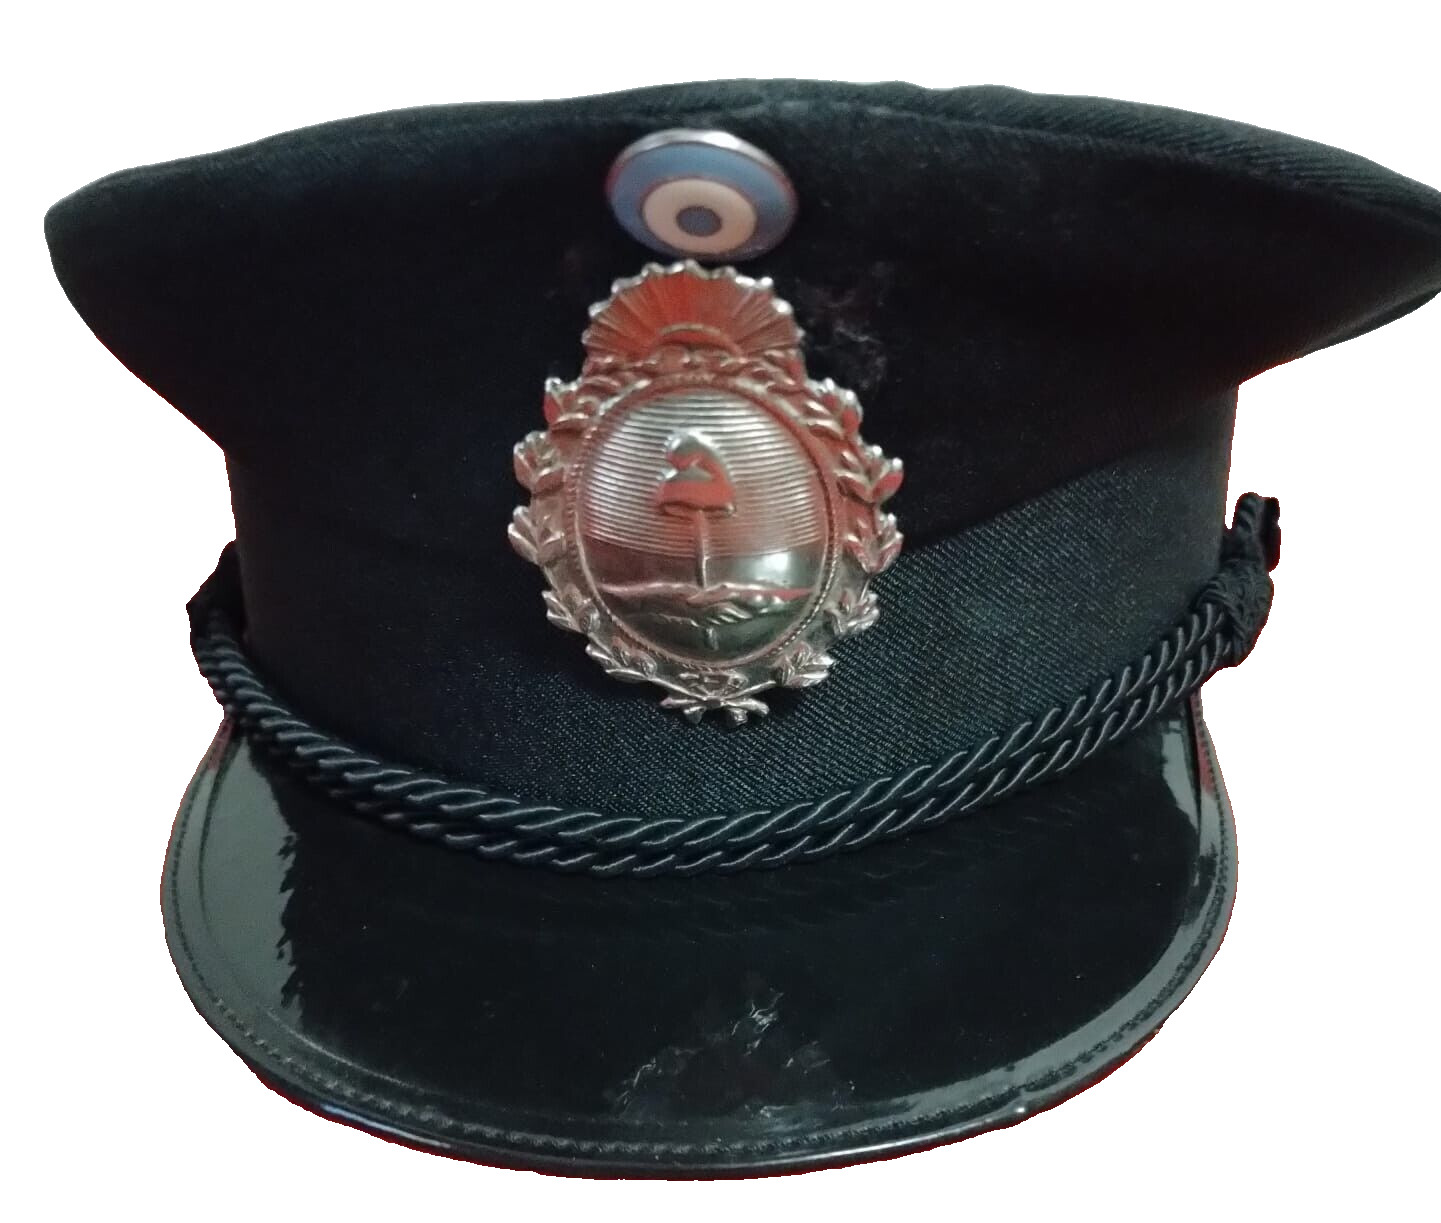 Original Agent cap of the Police of State Buenos Aires,Argentina. Vtge. Fron 60s